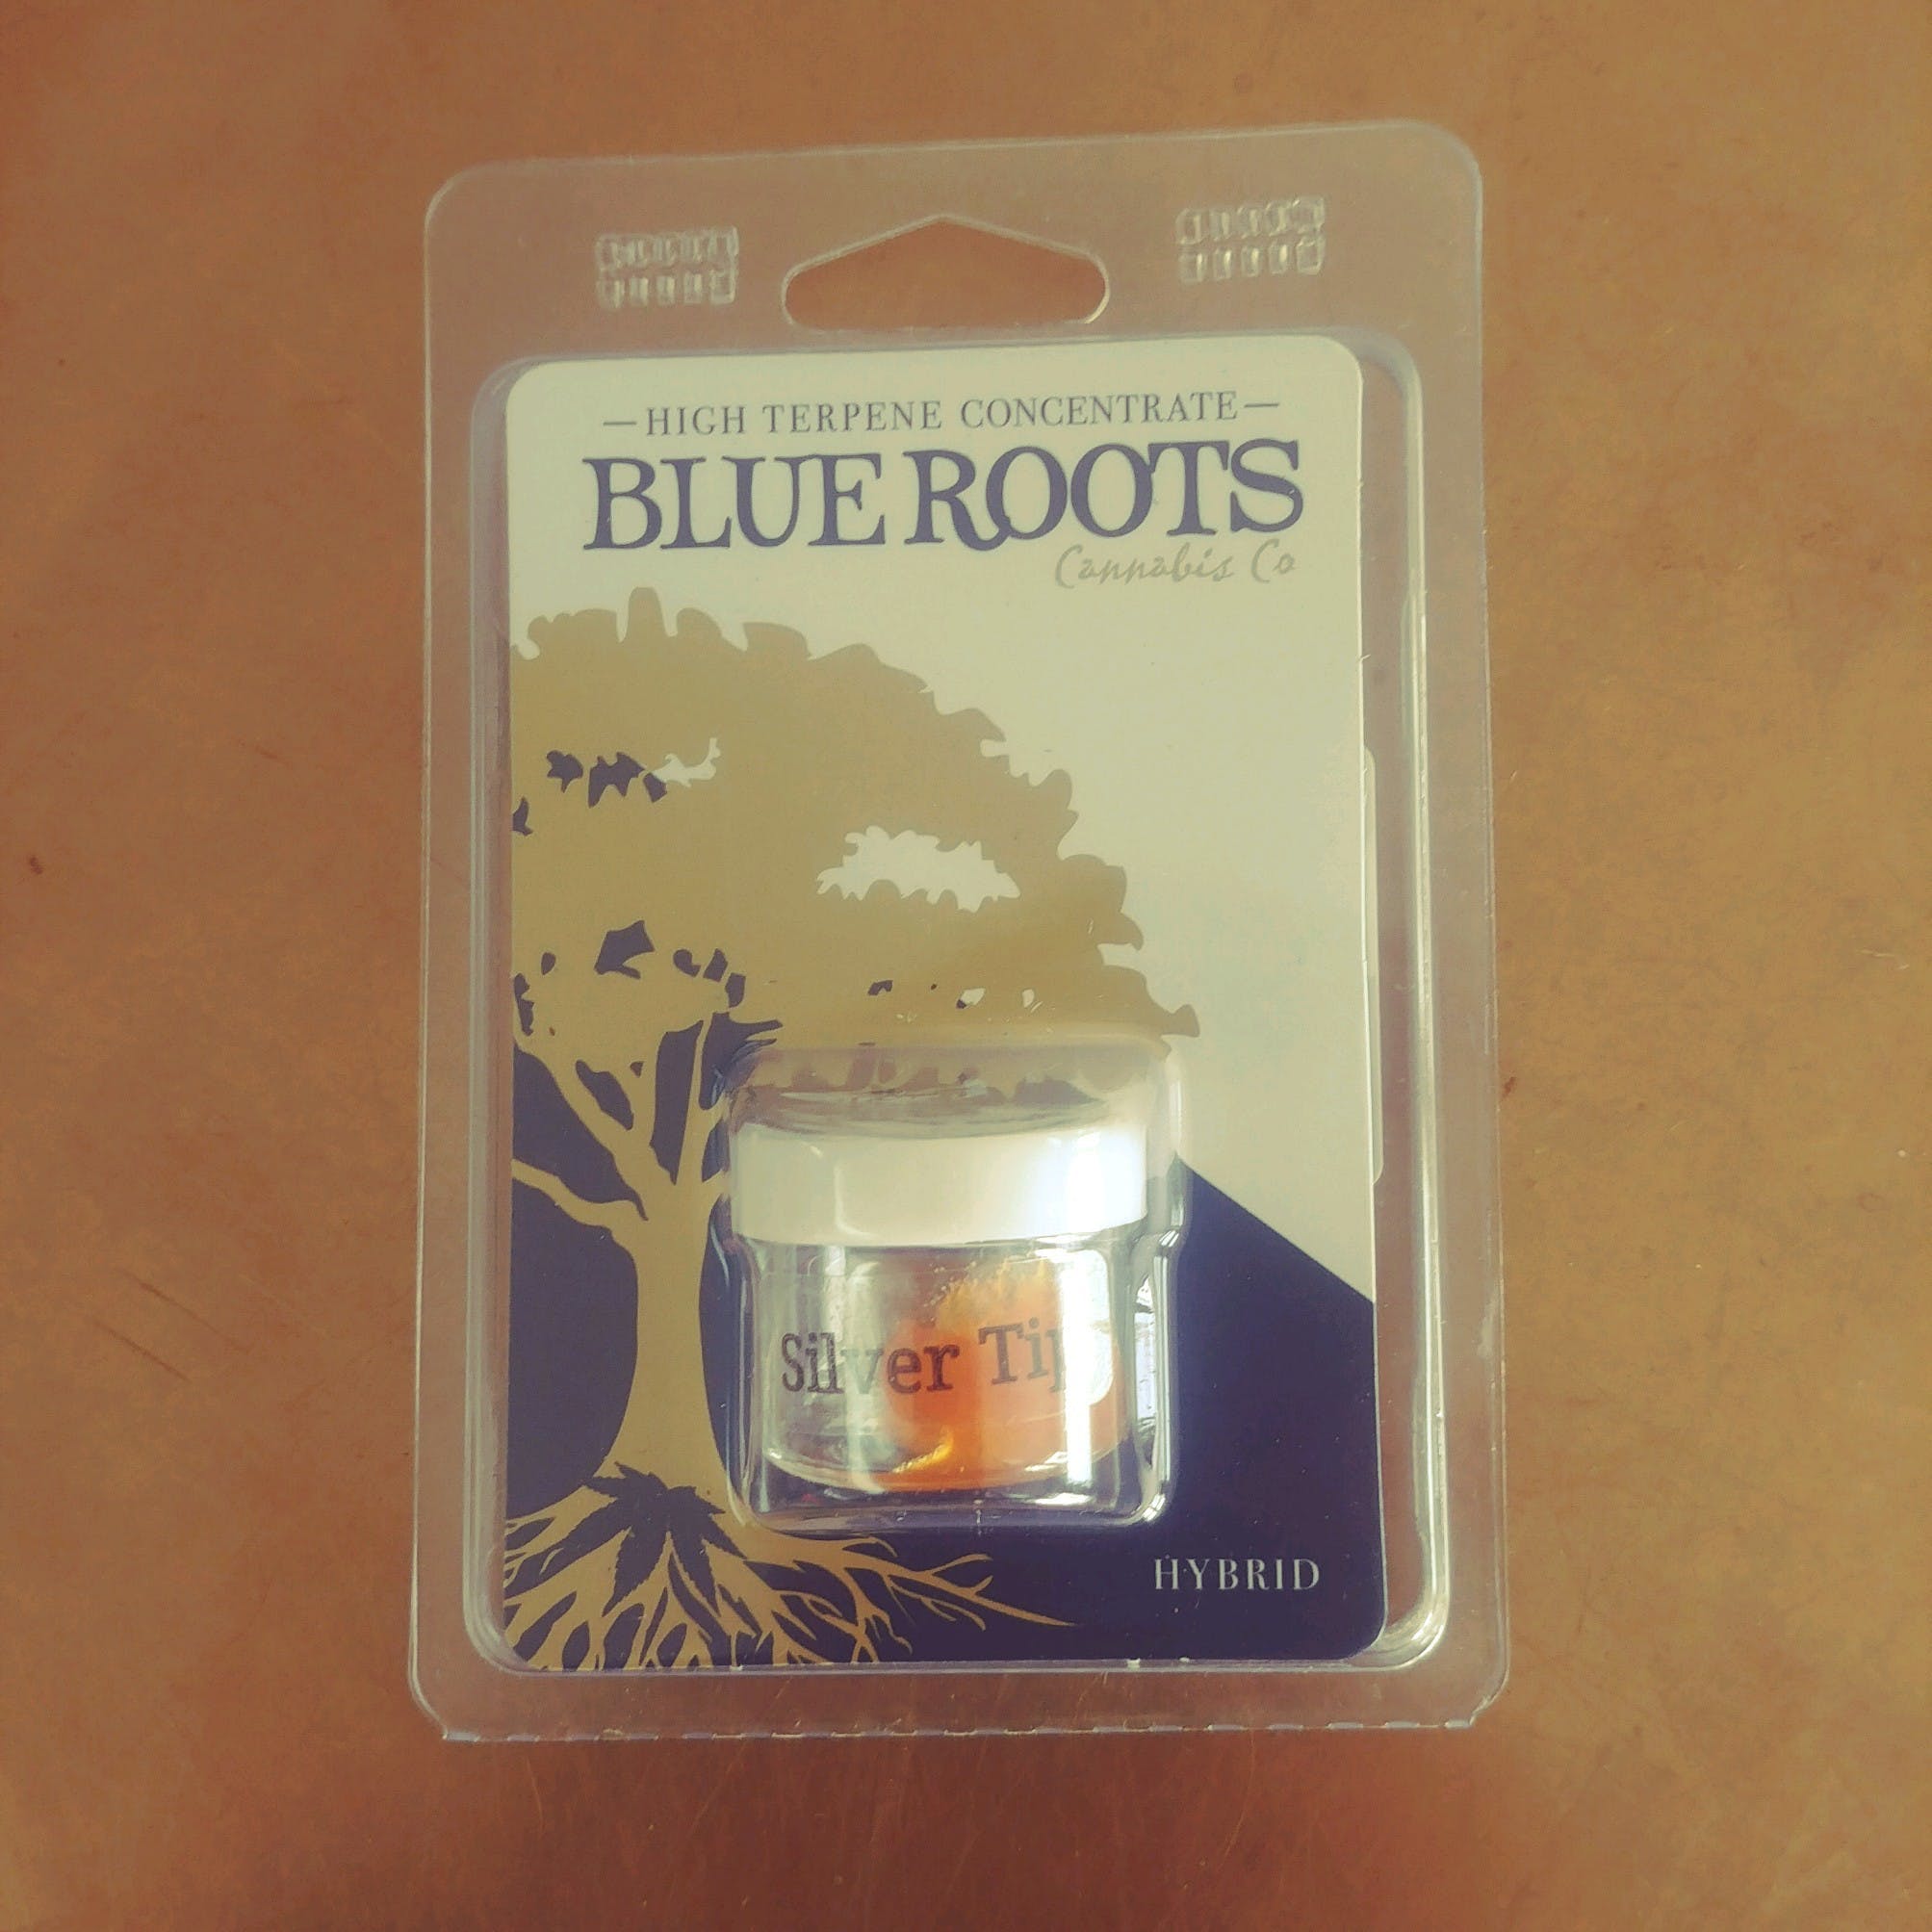 Silver Tip Terpene Sugar by Blue Roots